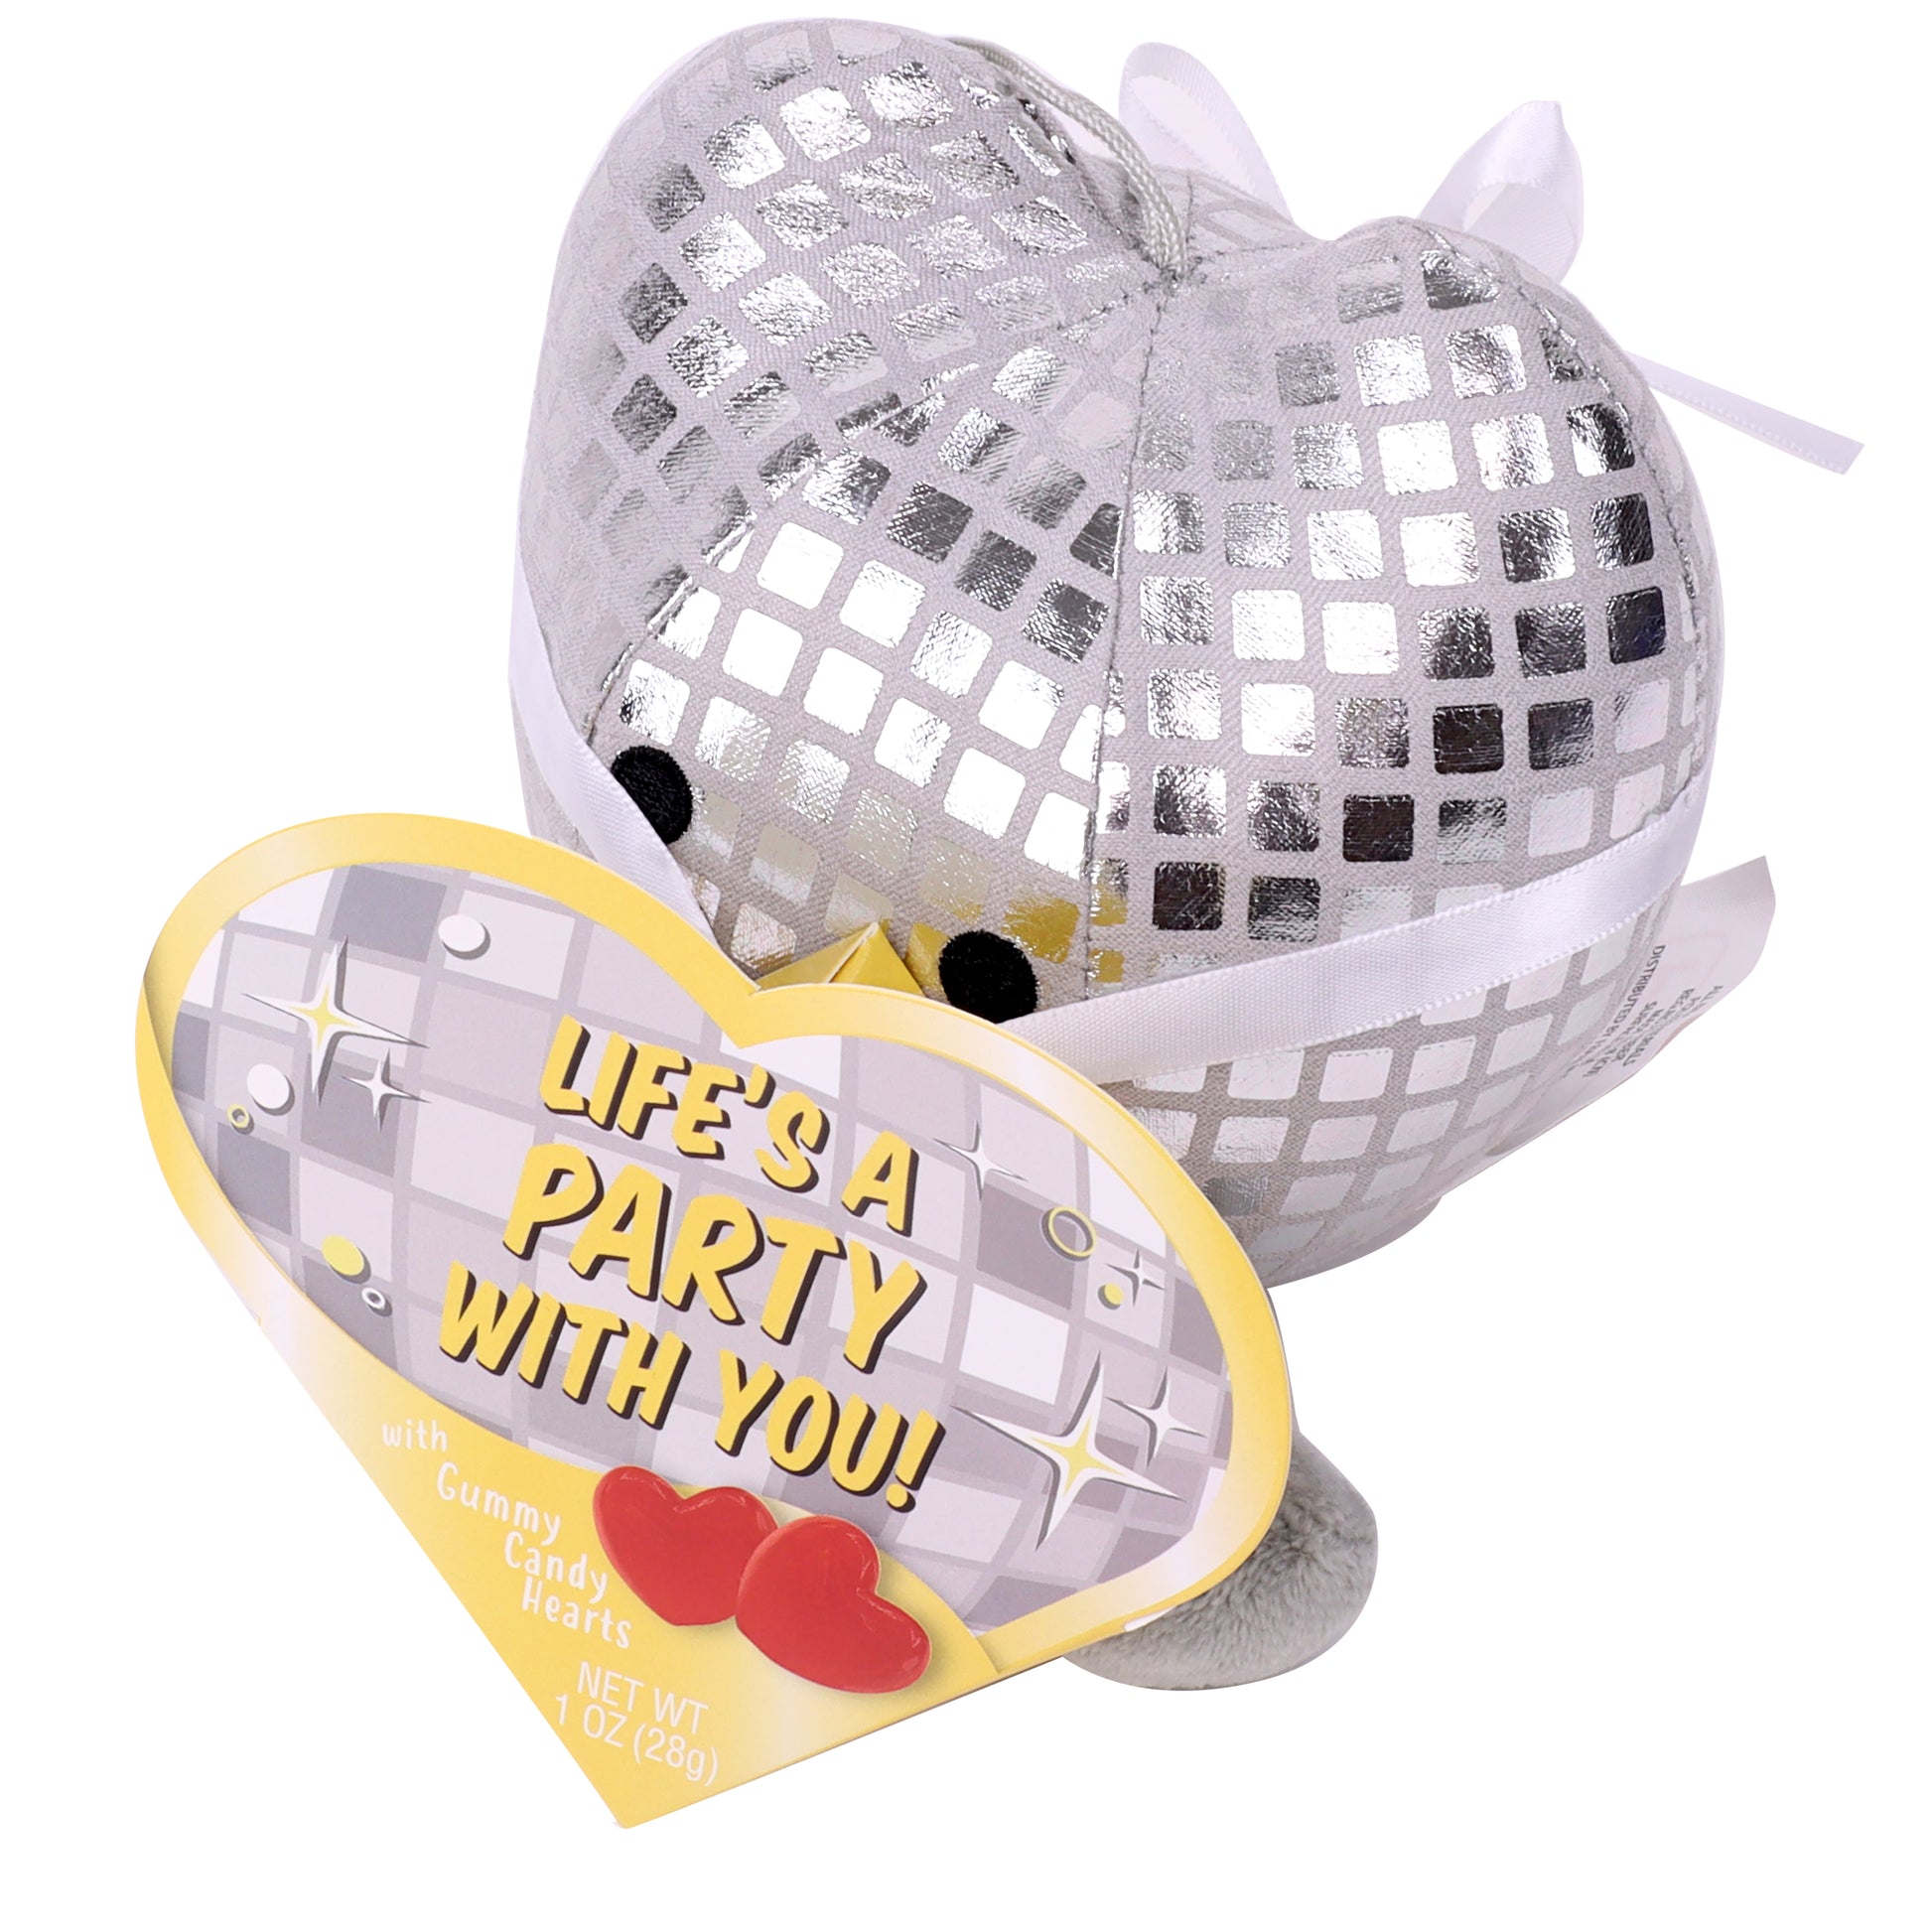 Heart shaped disco ball plush toy with a yellow heart box on the front